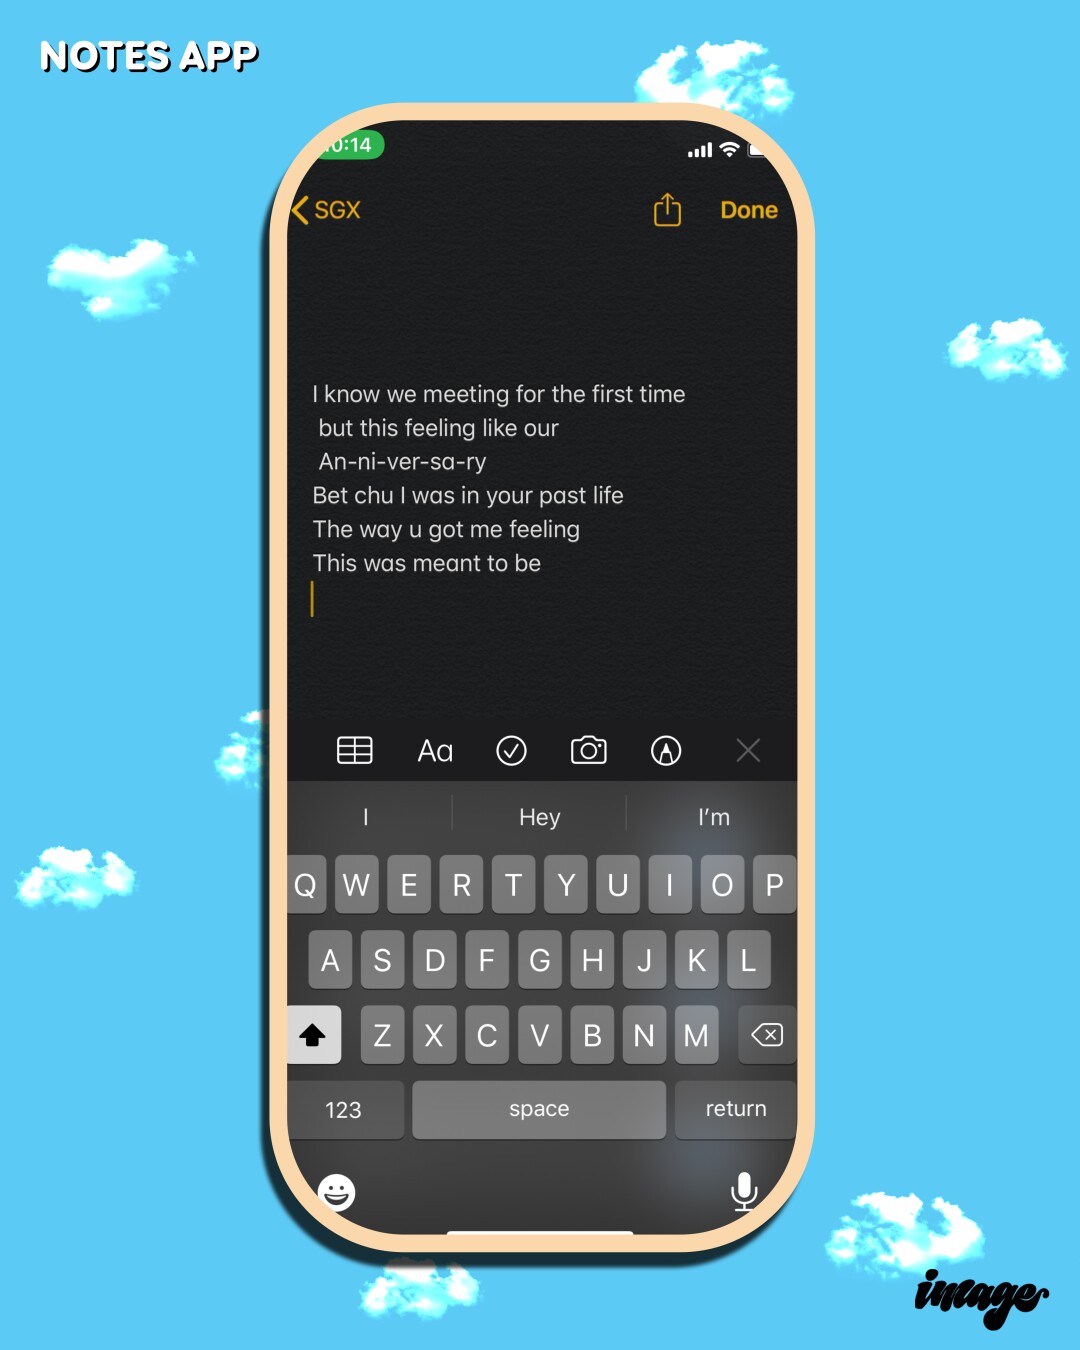 A cellphone showing song lyrics in a notes app